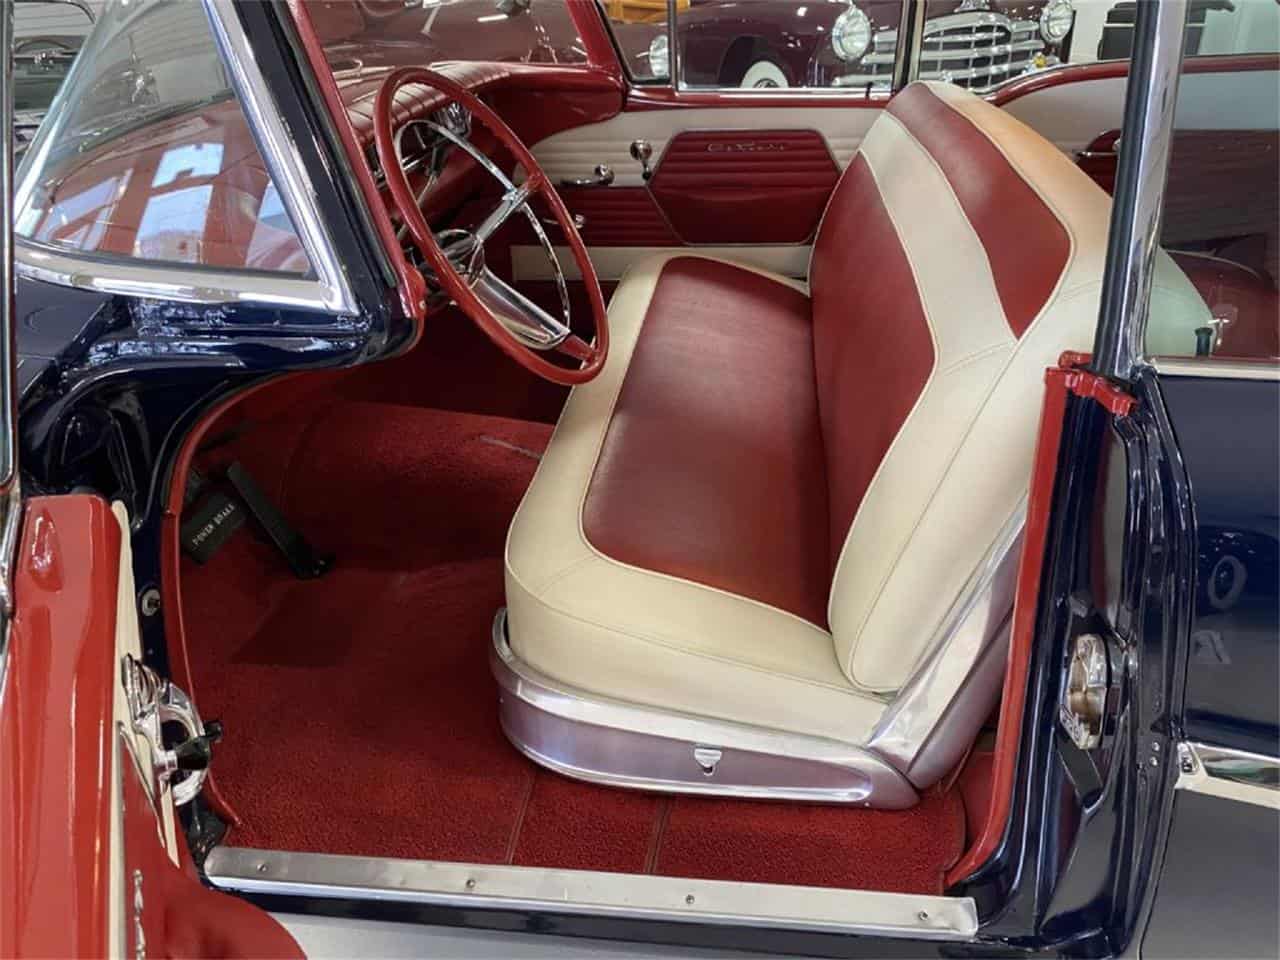 Buick, Pick of the Day: 1958 Buick Caballero, rare luxury station wagon, ClassicCars.com Journal